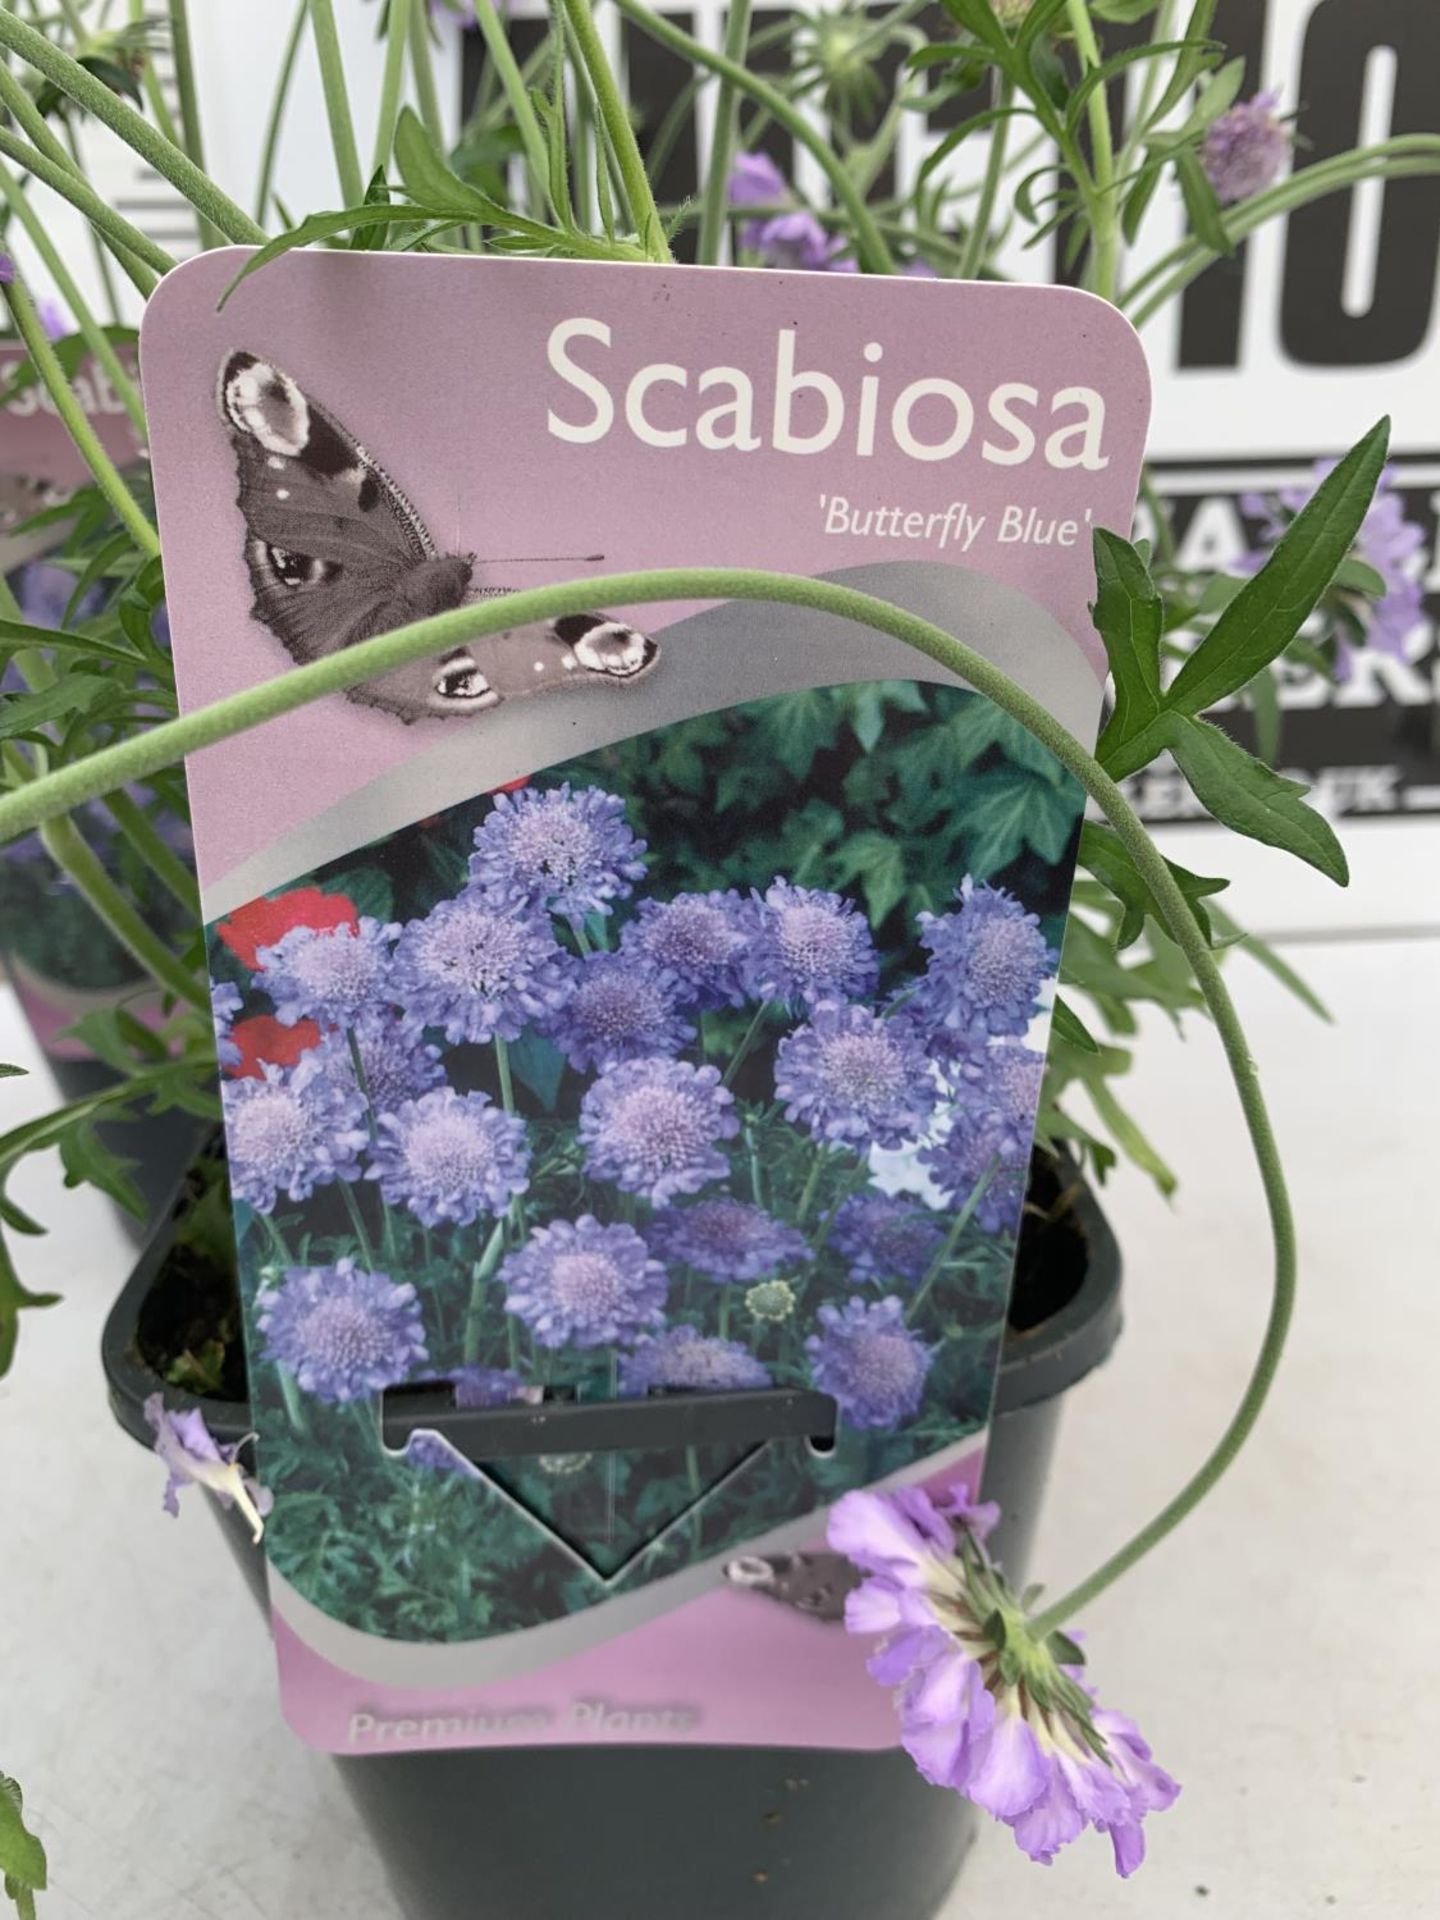 SIX SCABIOSA BUTTERFLY BLUE IN 2 LTR POTS 50-60CM TALL TO BE SOLD FOR THE SIX PLUS VAT - Image 7 of 8